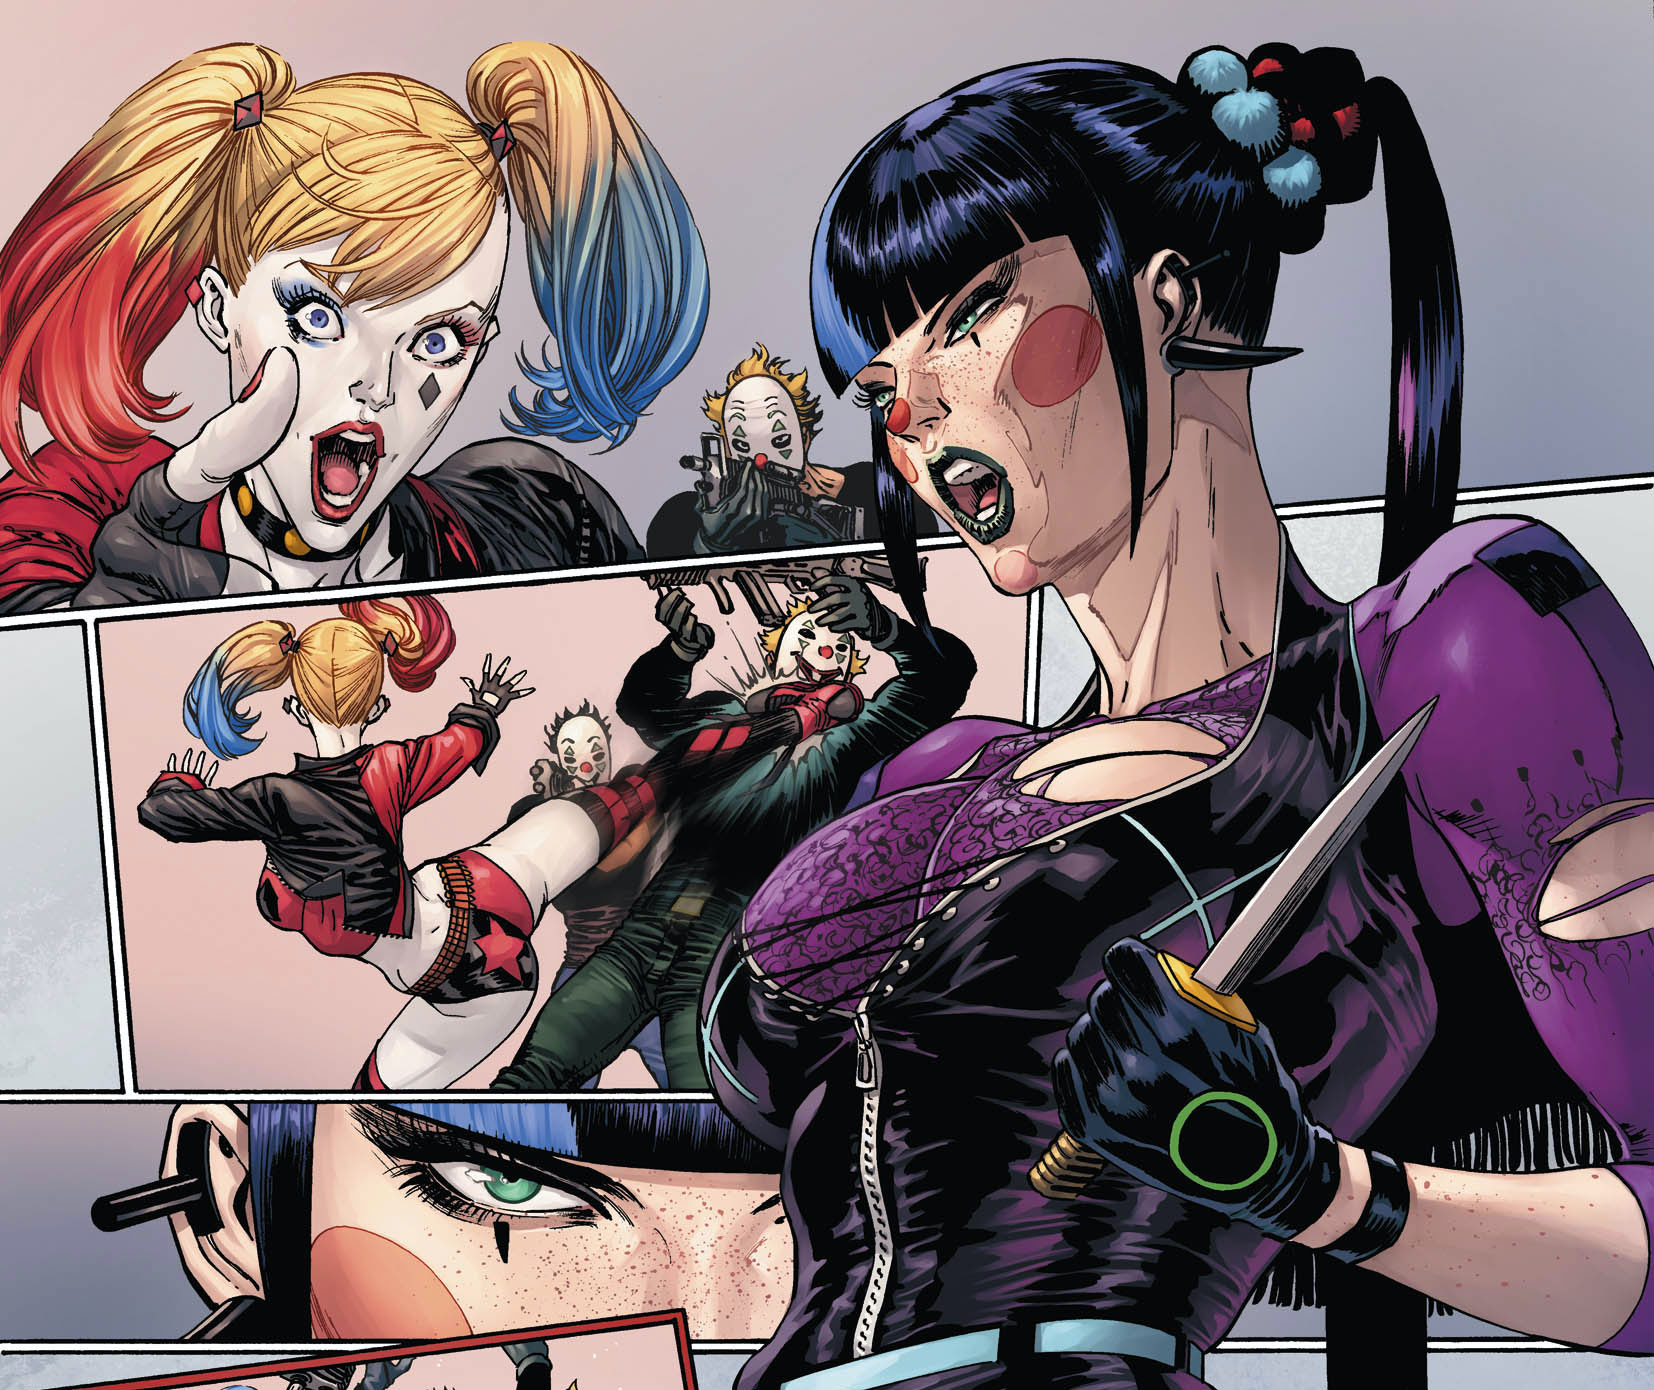 DC Comics First Look: Batman #93 features Harley vs. Punchline on the road to "The Joker War"